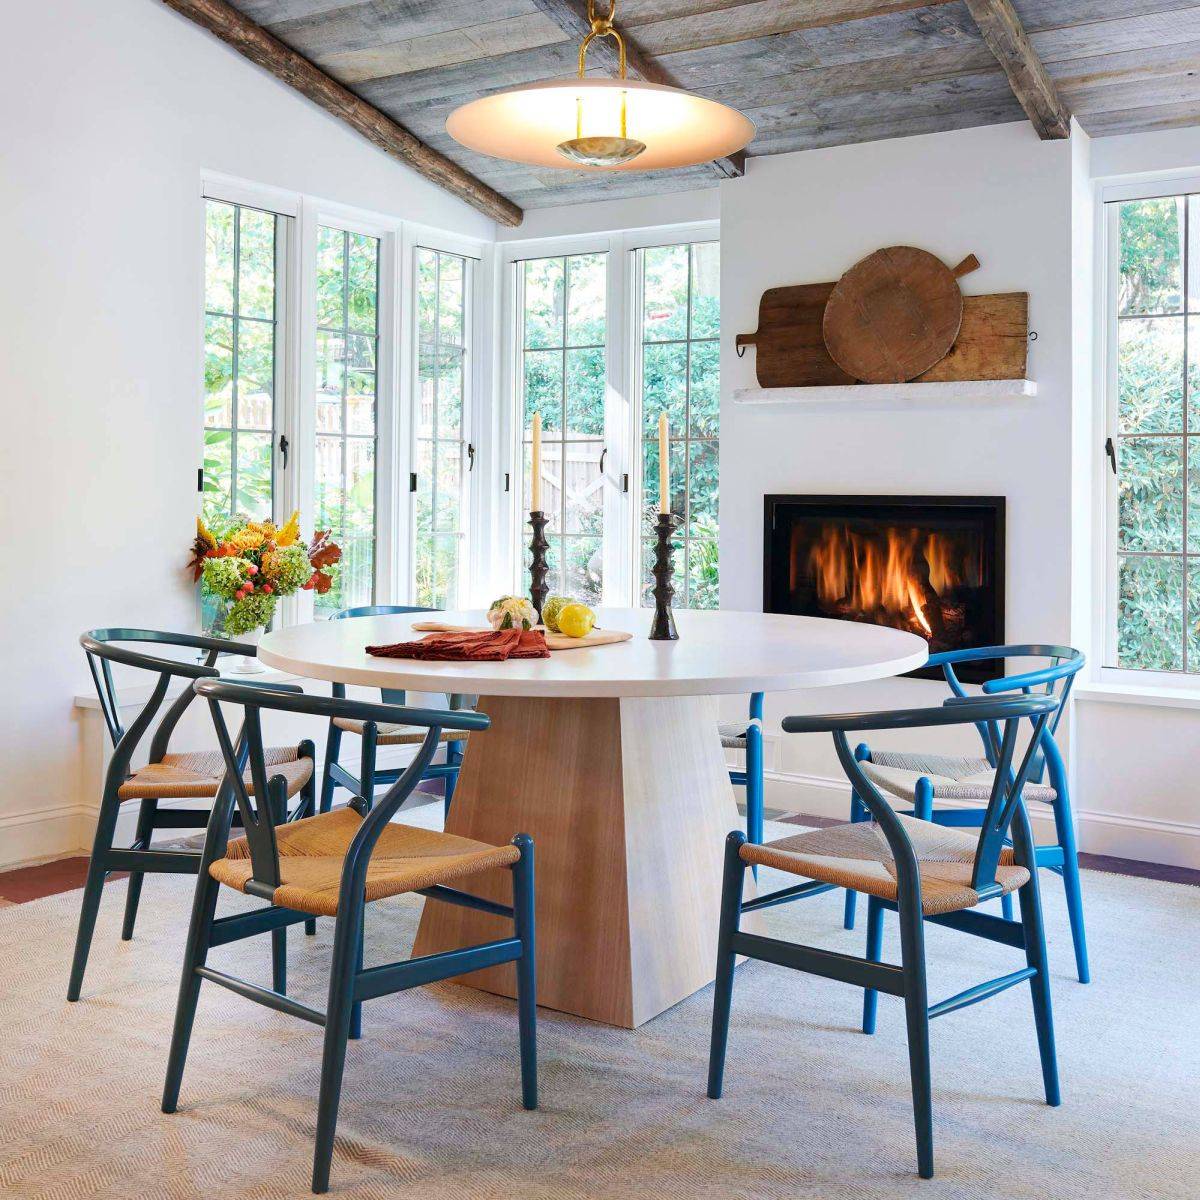 Classic-wishbone-chair-in-blue-adds-color-and-class-to-this-white-dining-room-with-fireplace-50287